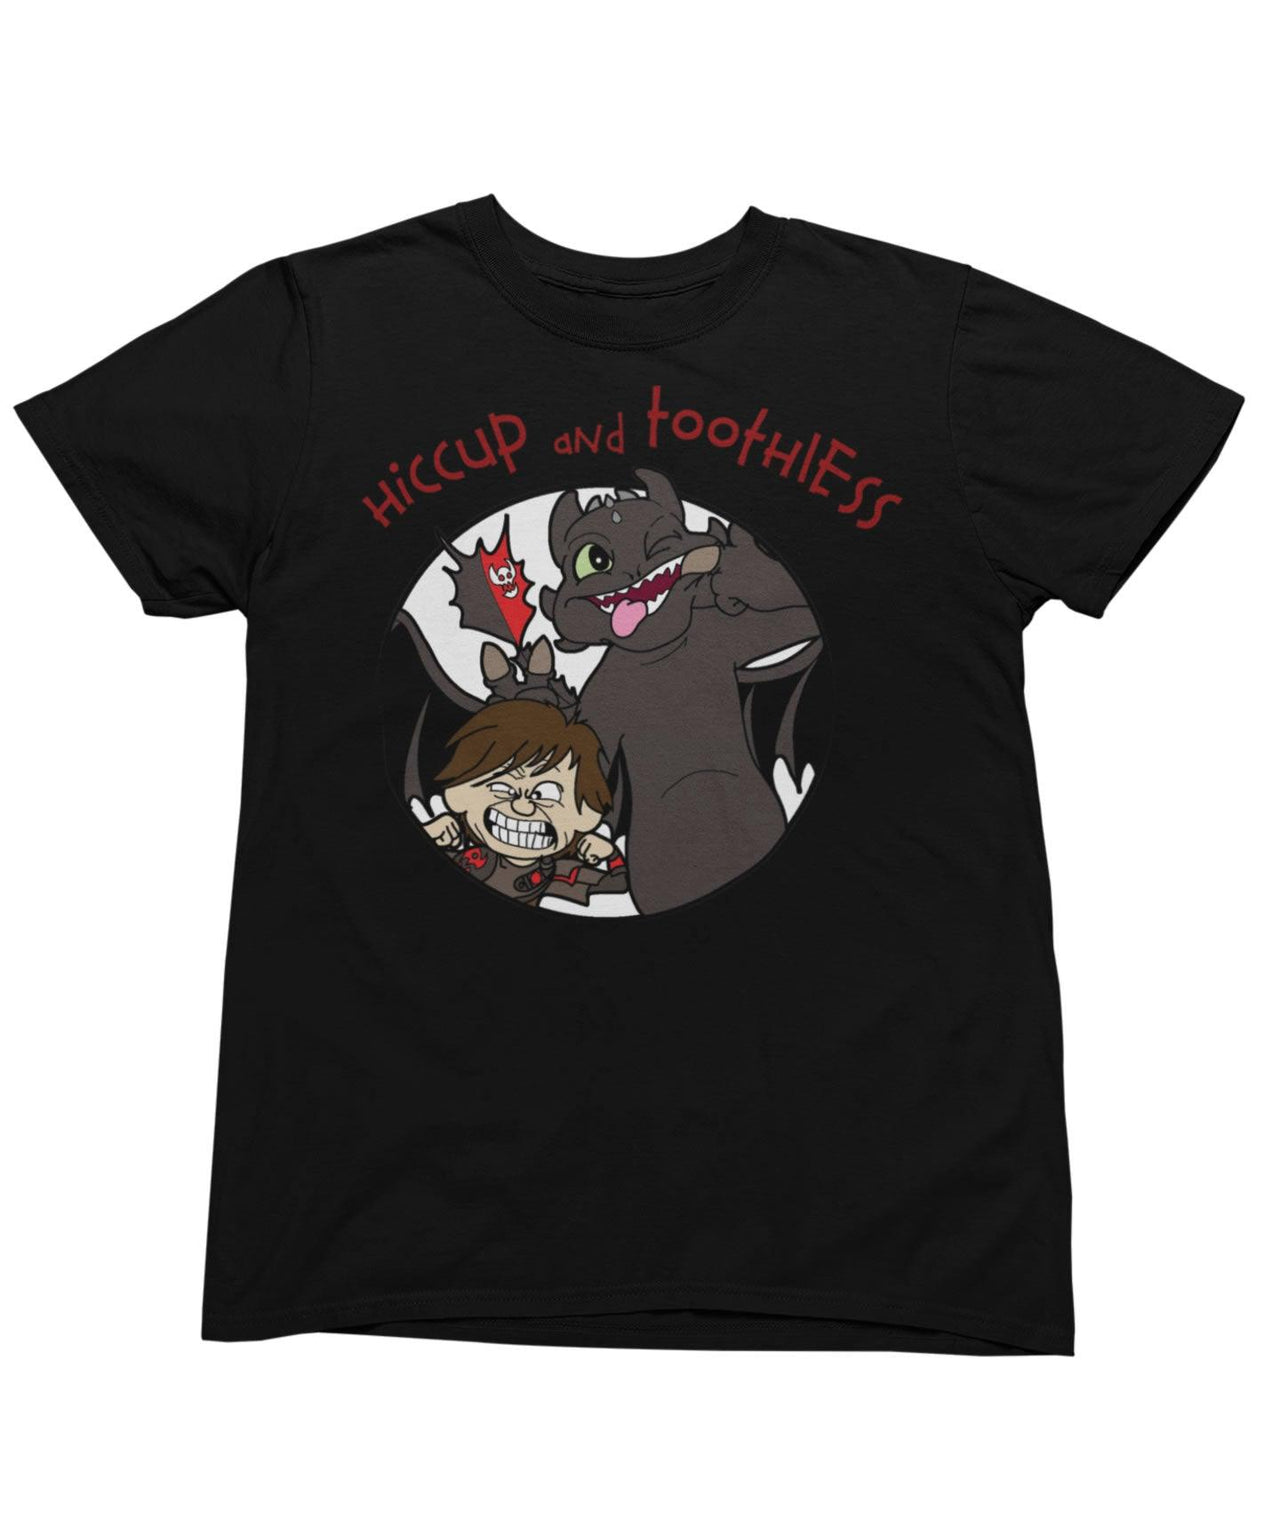 Top Notchy Hiccup and Toothless Men's/Unisex Unisex T-Shirt For Men And Women 8Ball